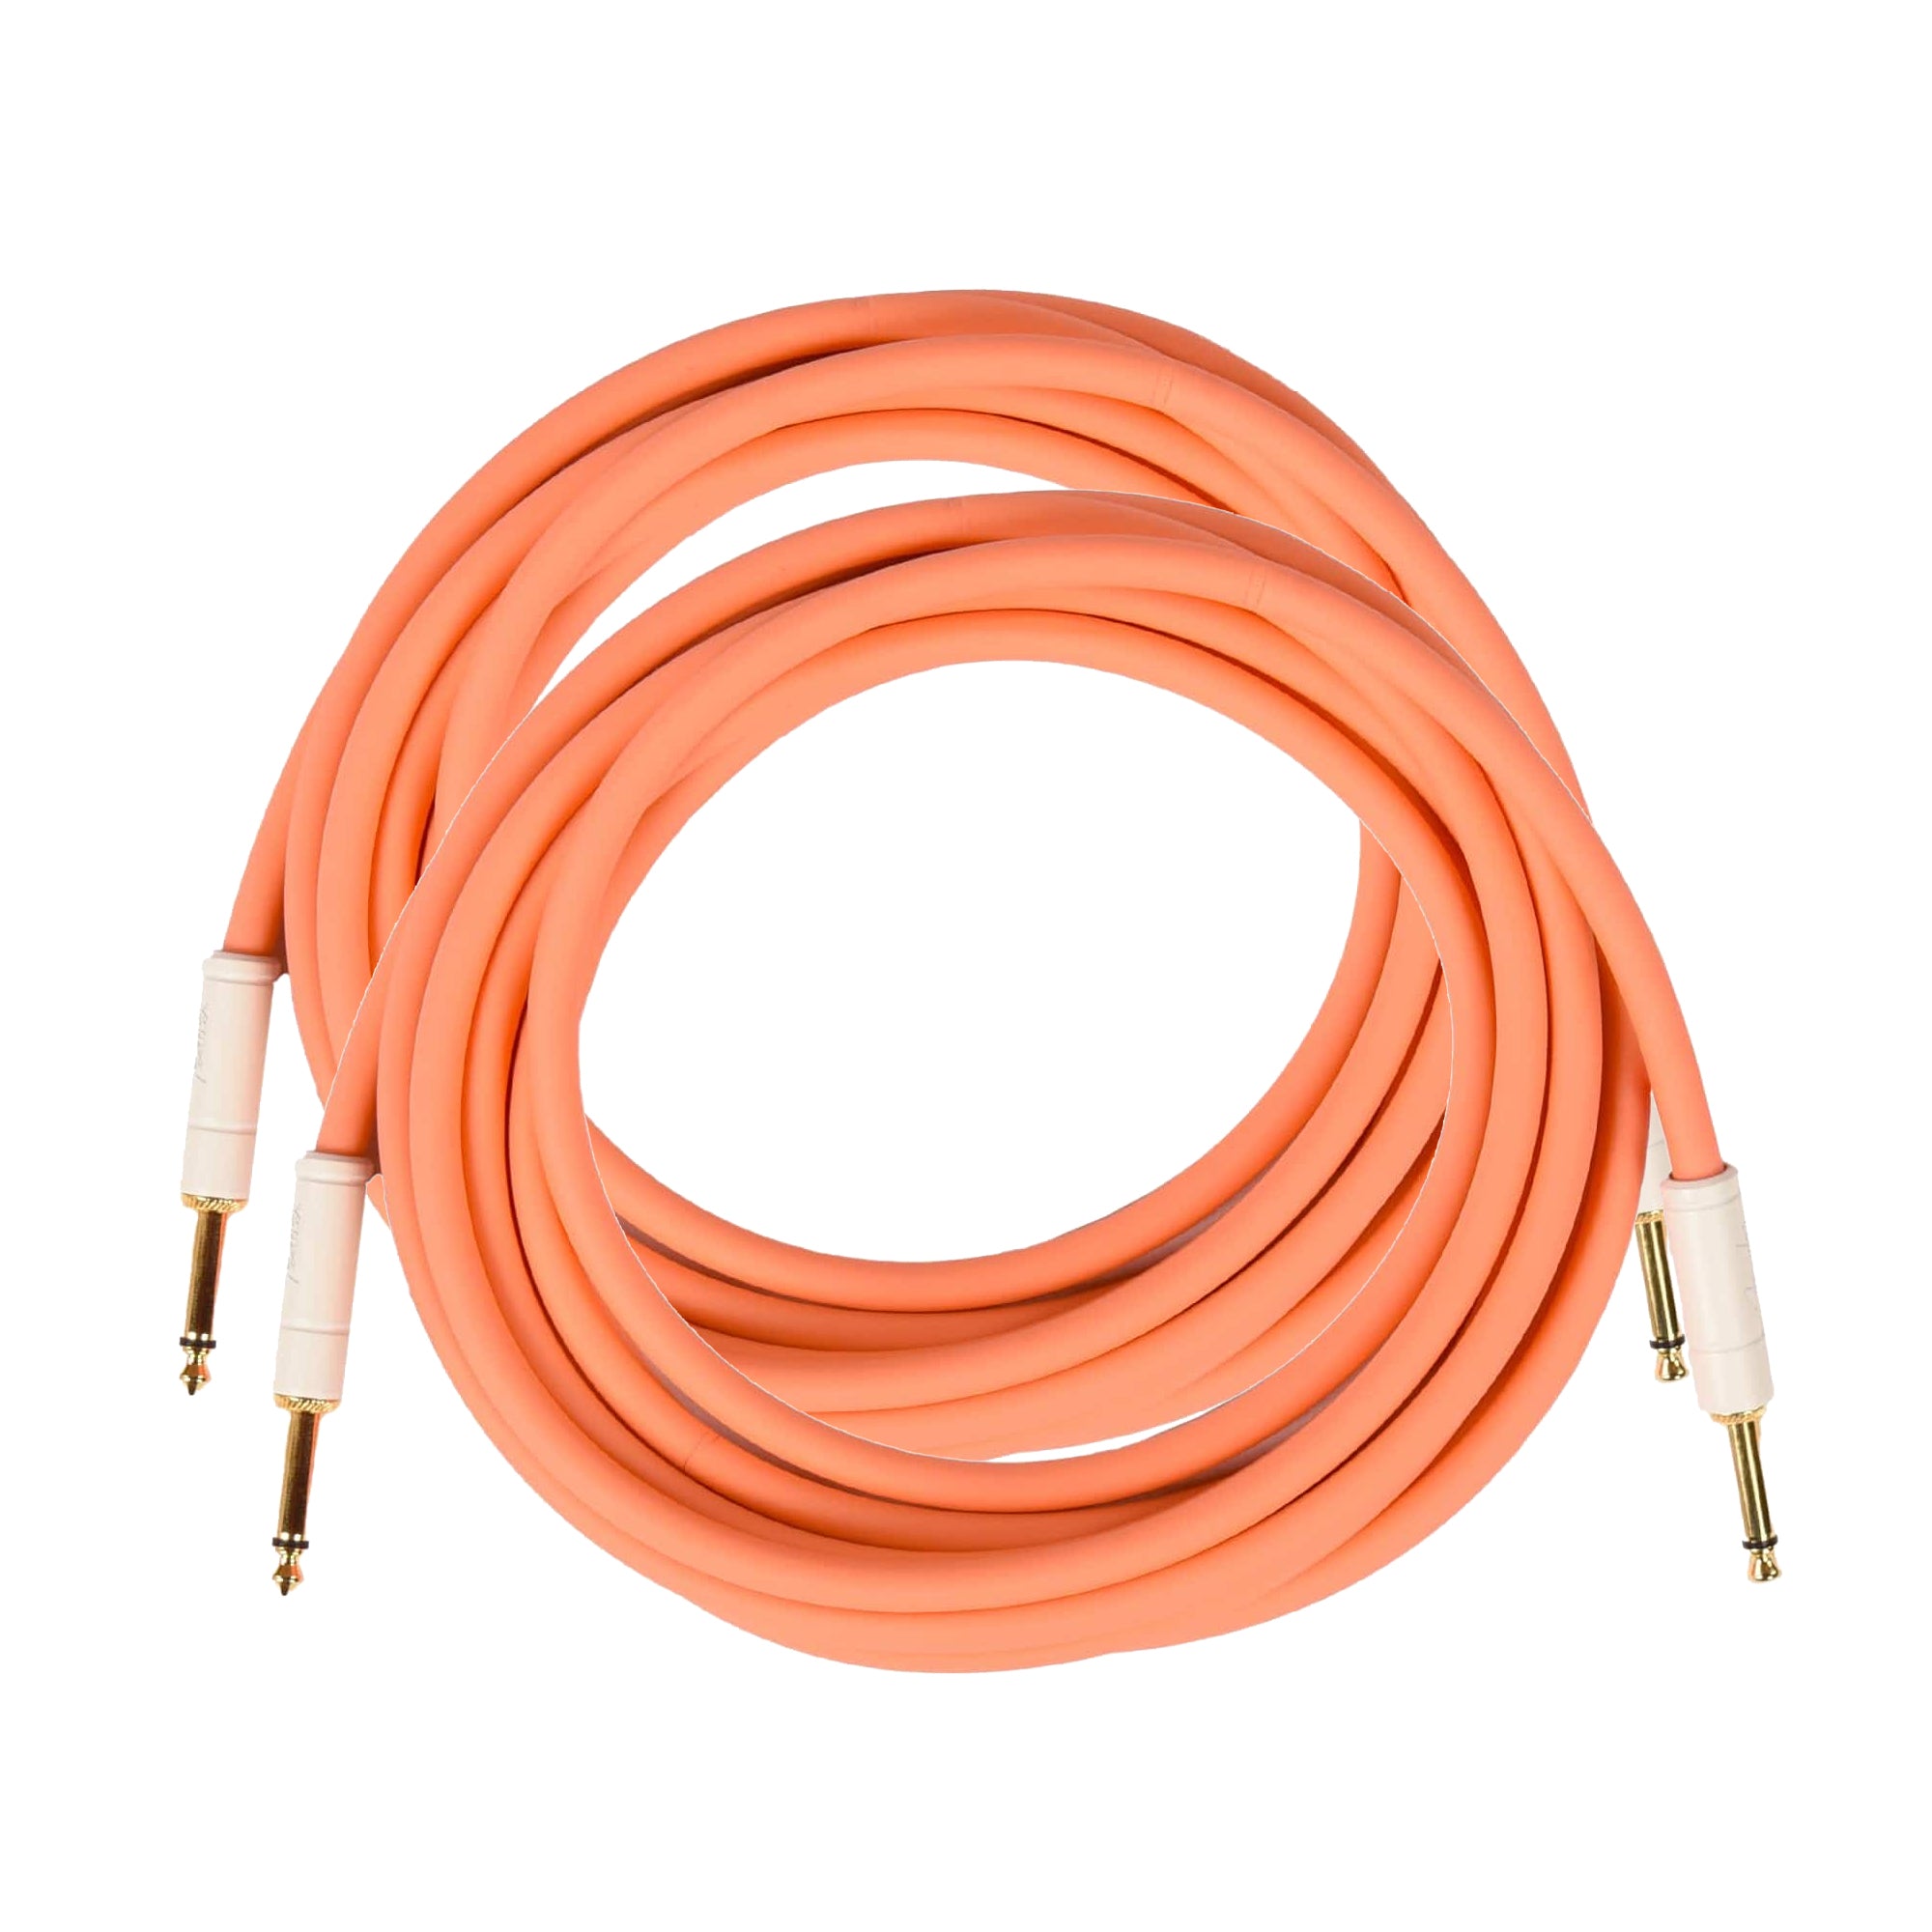 Fender Deluxe Instrument Cable Pacific Peach 10' Straight-Straight 2 Pack Bundle